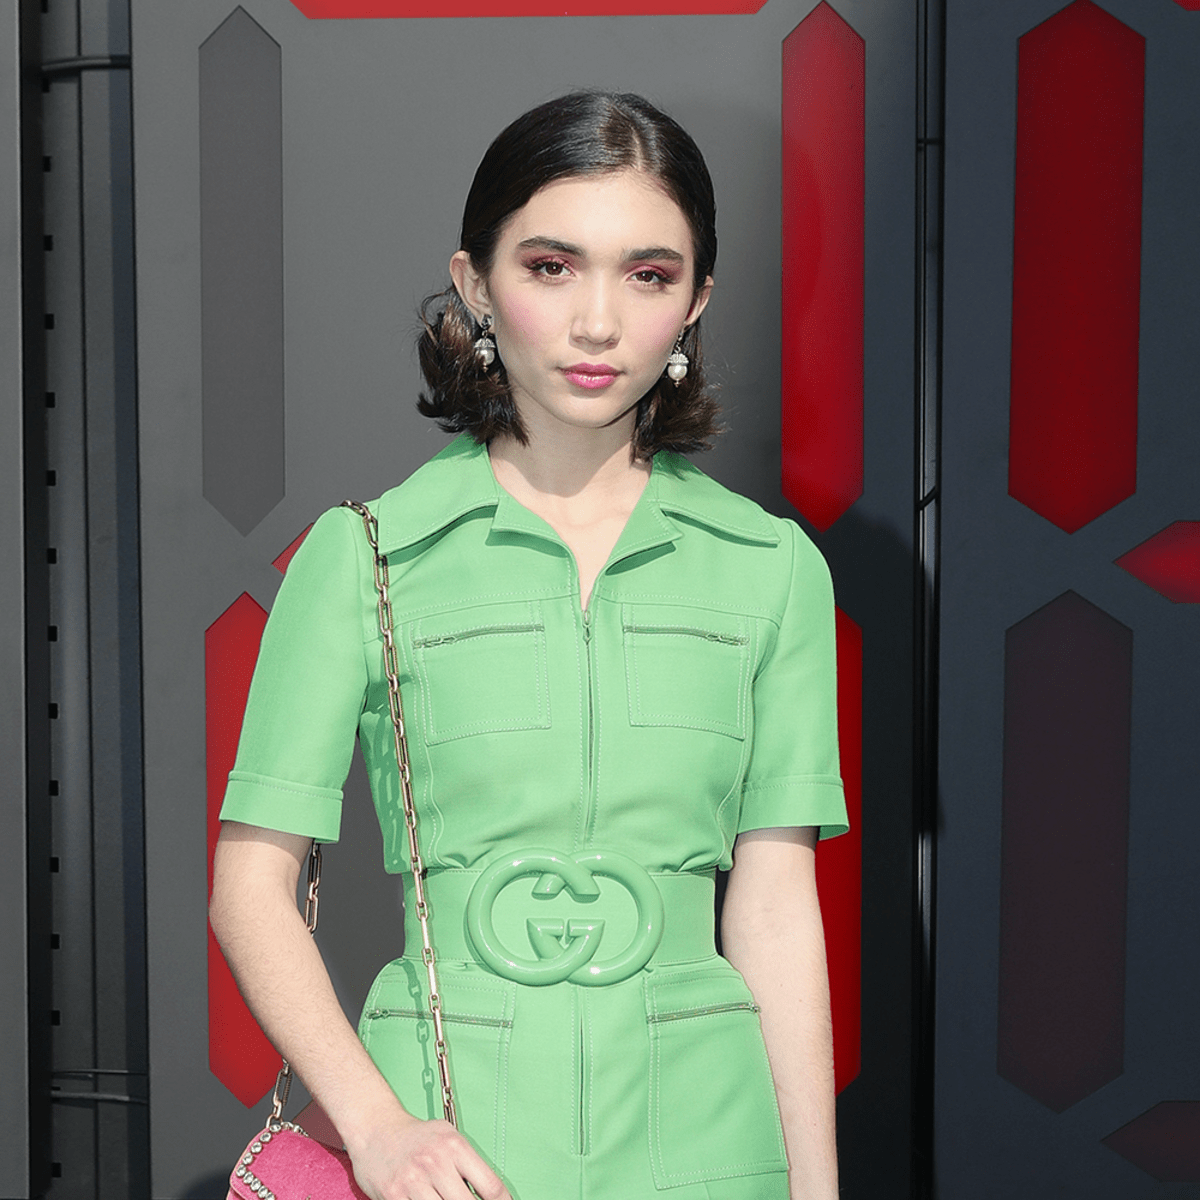 Great Outfits in Fashion History: Rowan Blanchard in That Green Gucci  Jumpsuit - Fashionista